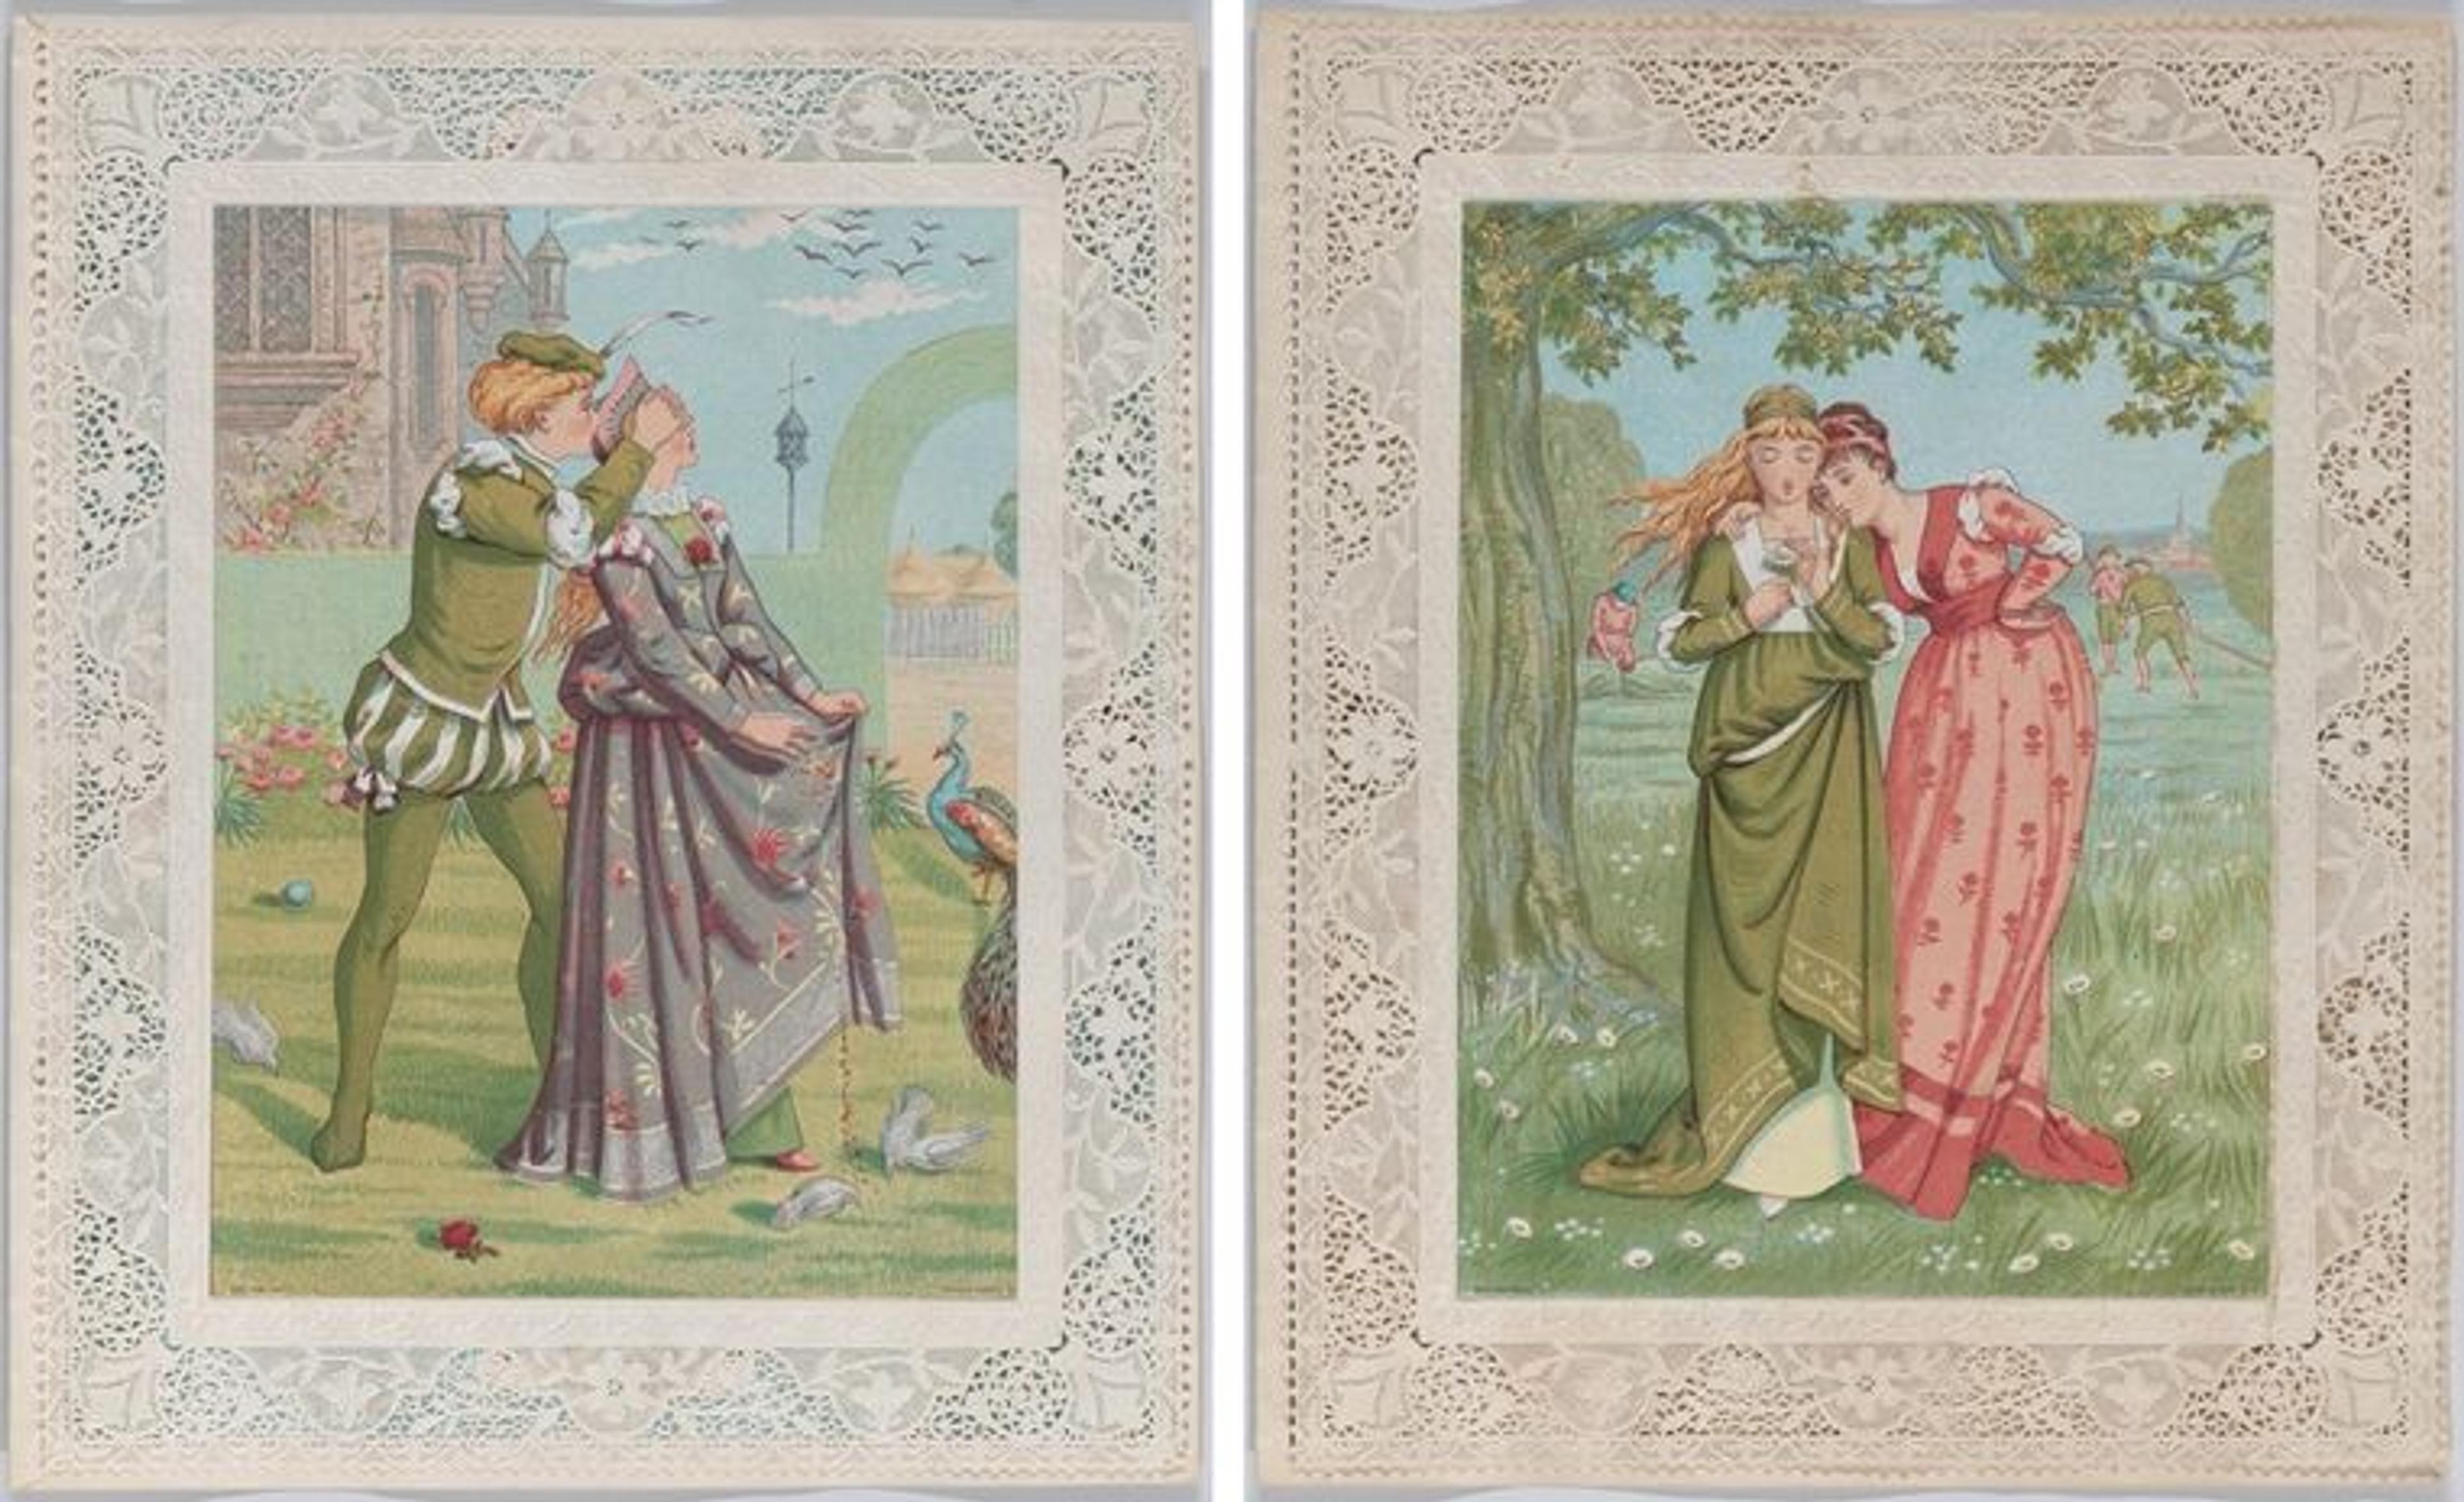 Two Kate Greenaway valentines depicting young lovers in pastoral settings